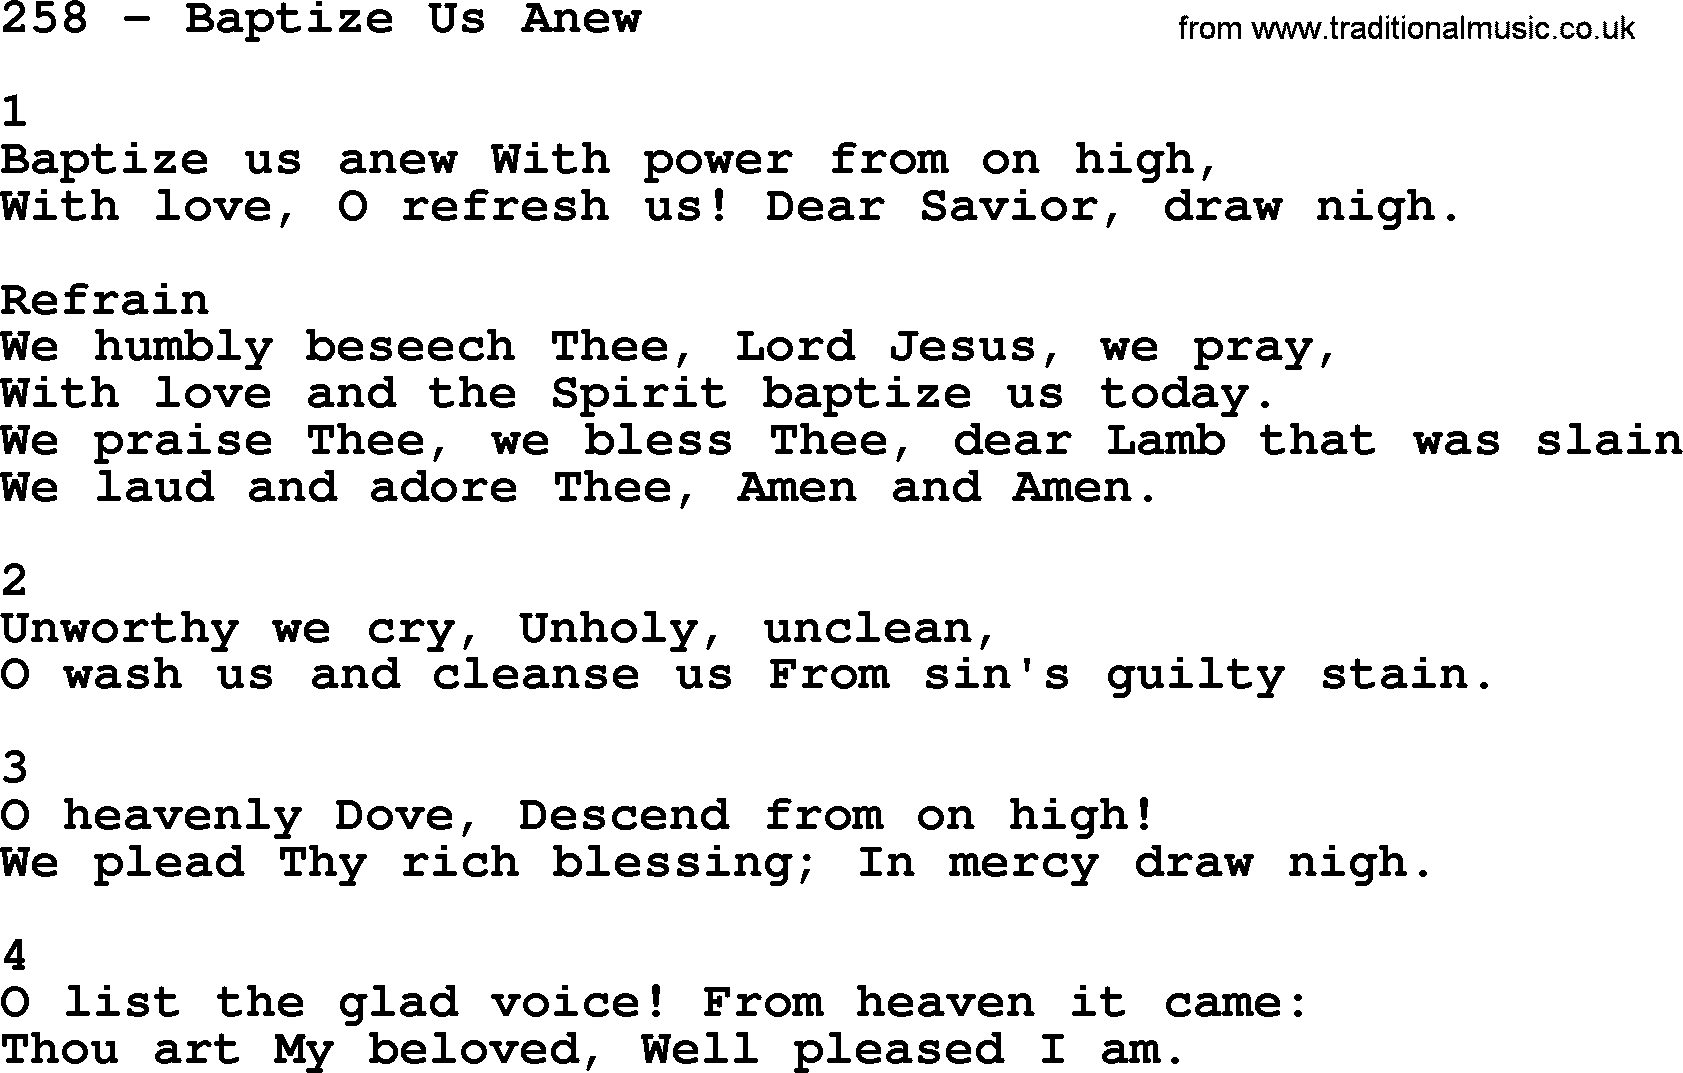 Complete Adventis Hymnal, title: 258-Baptize Us Anew, with lyrics, midi, mp3, powerpoints(PPT) and PDF,